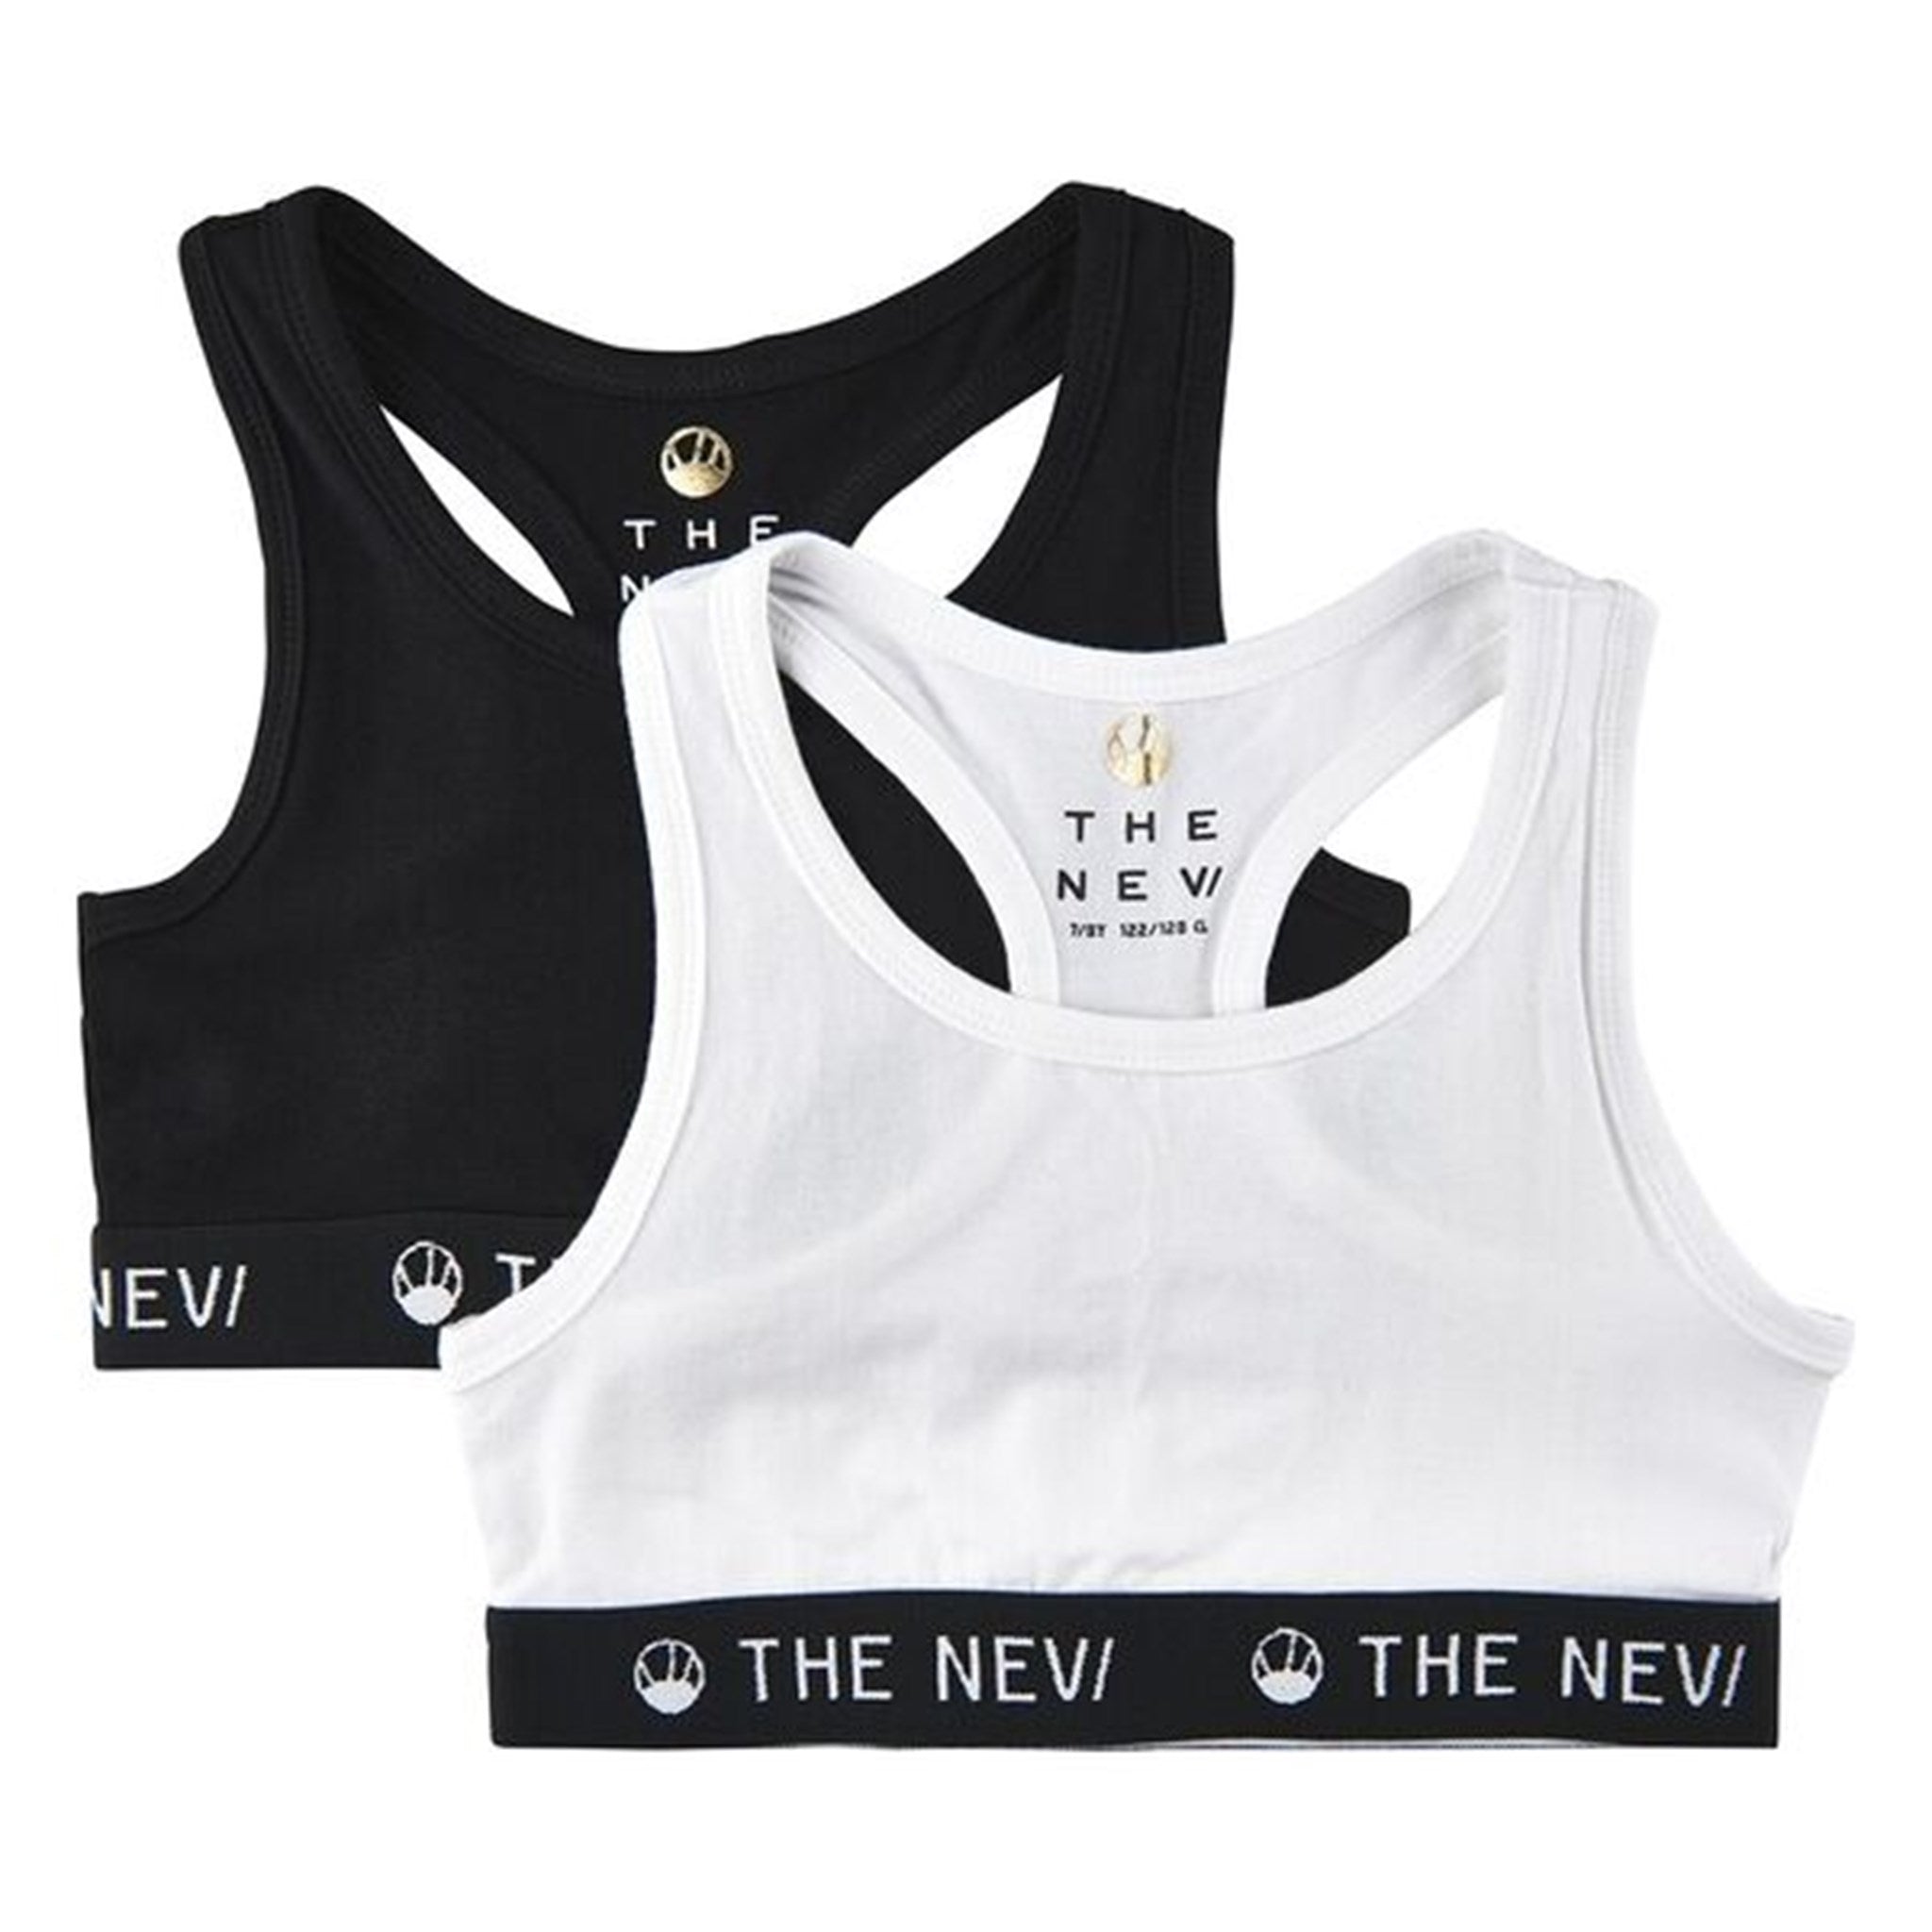 The New Organic Top Noos 2-pack Black/White